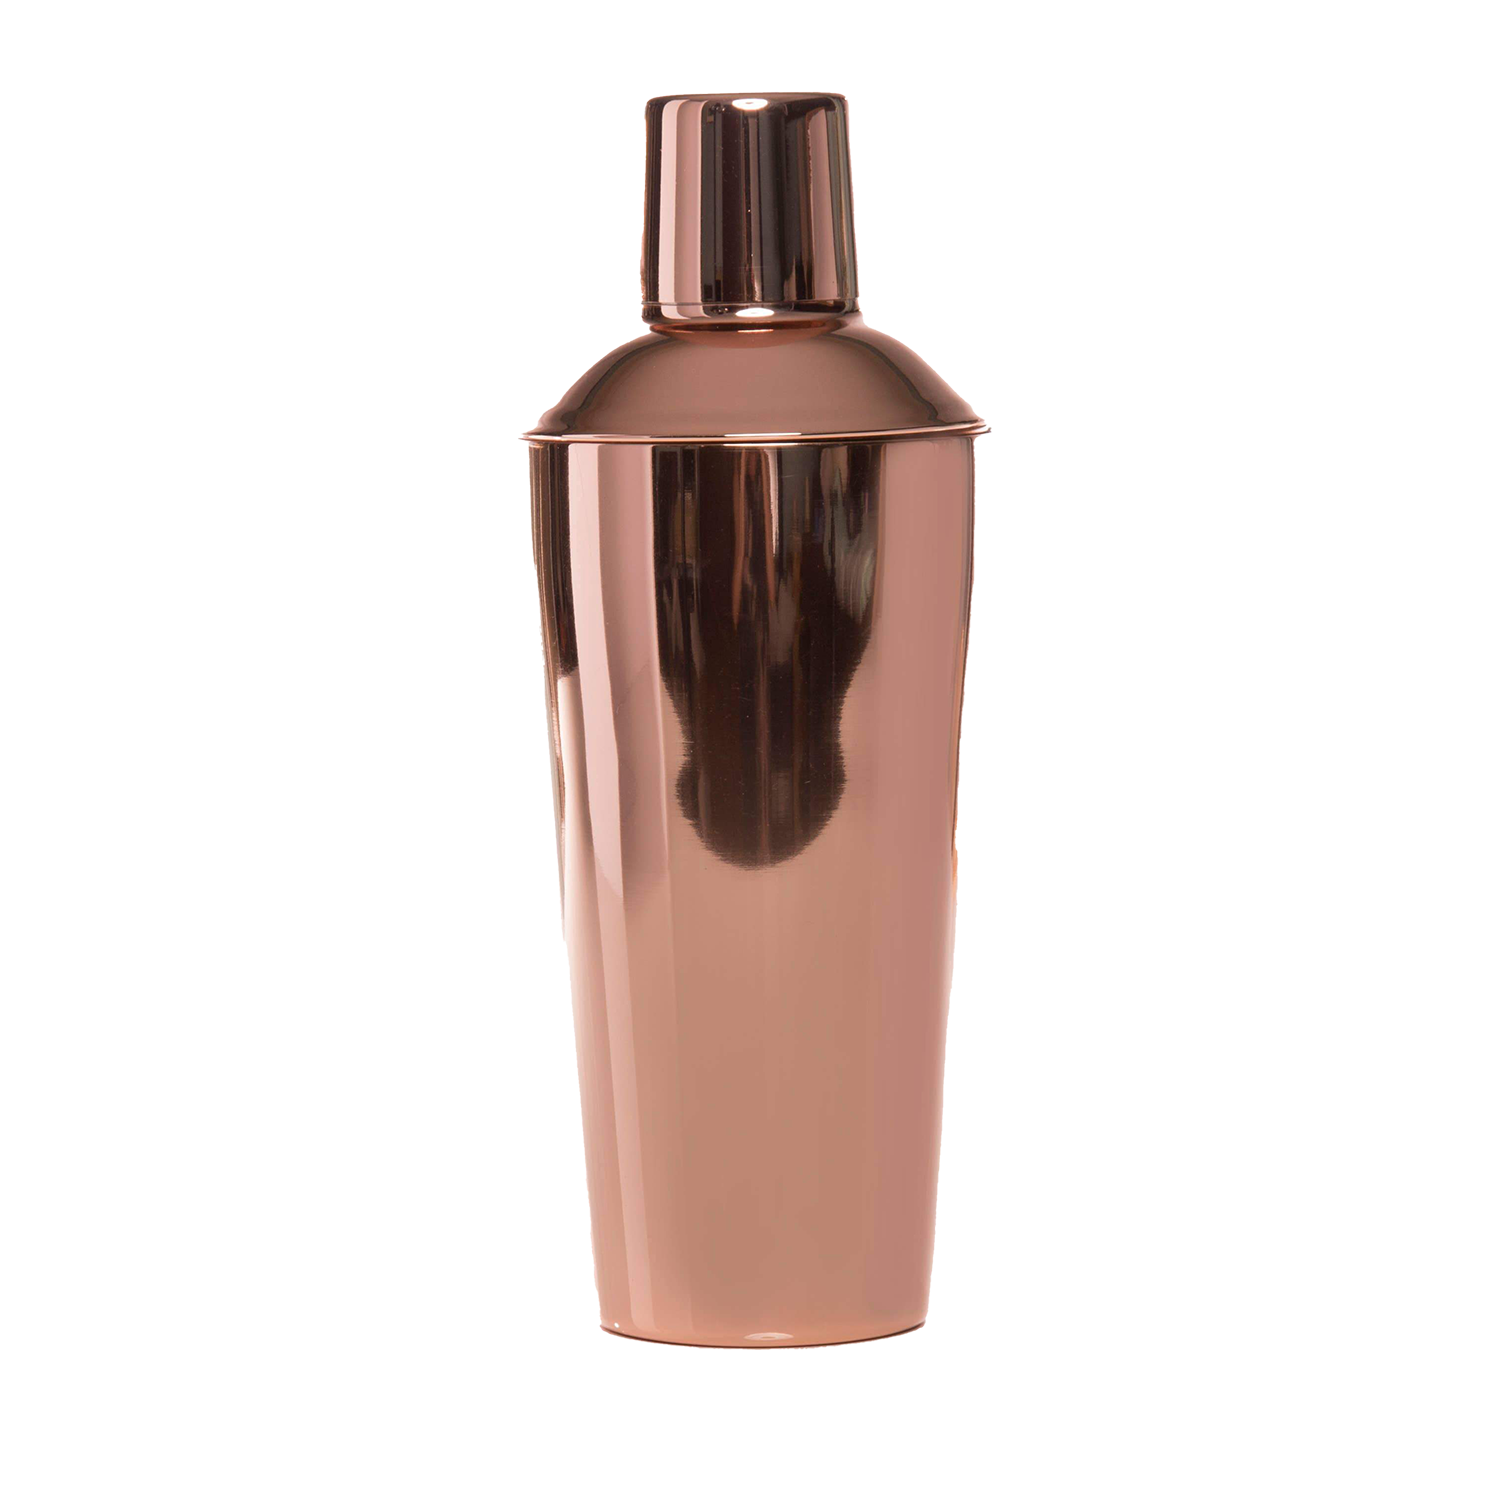 Cocktail Shaker - Copper 